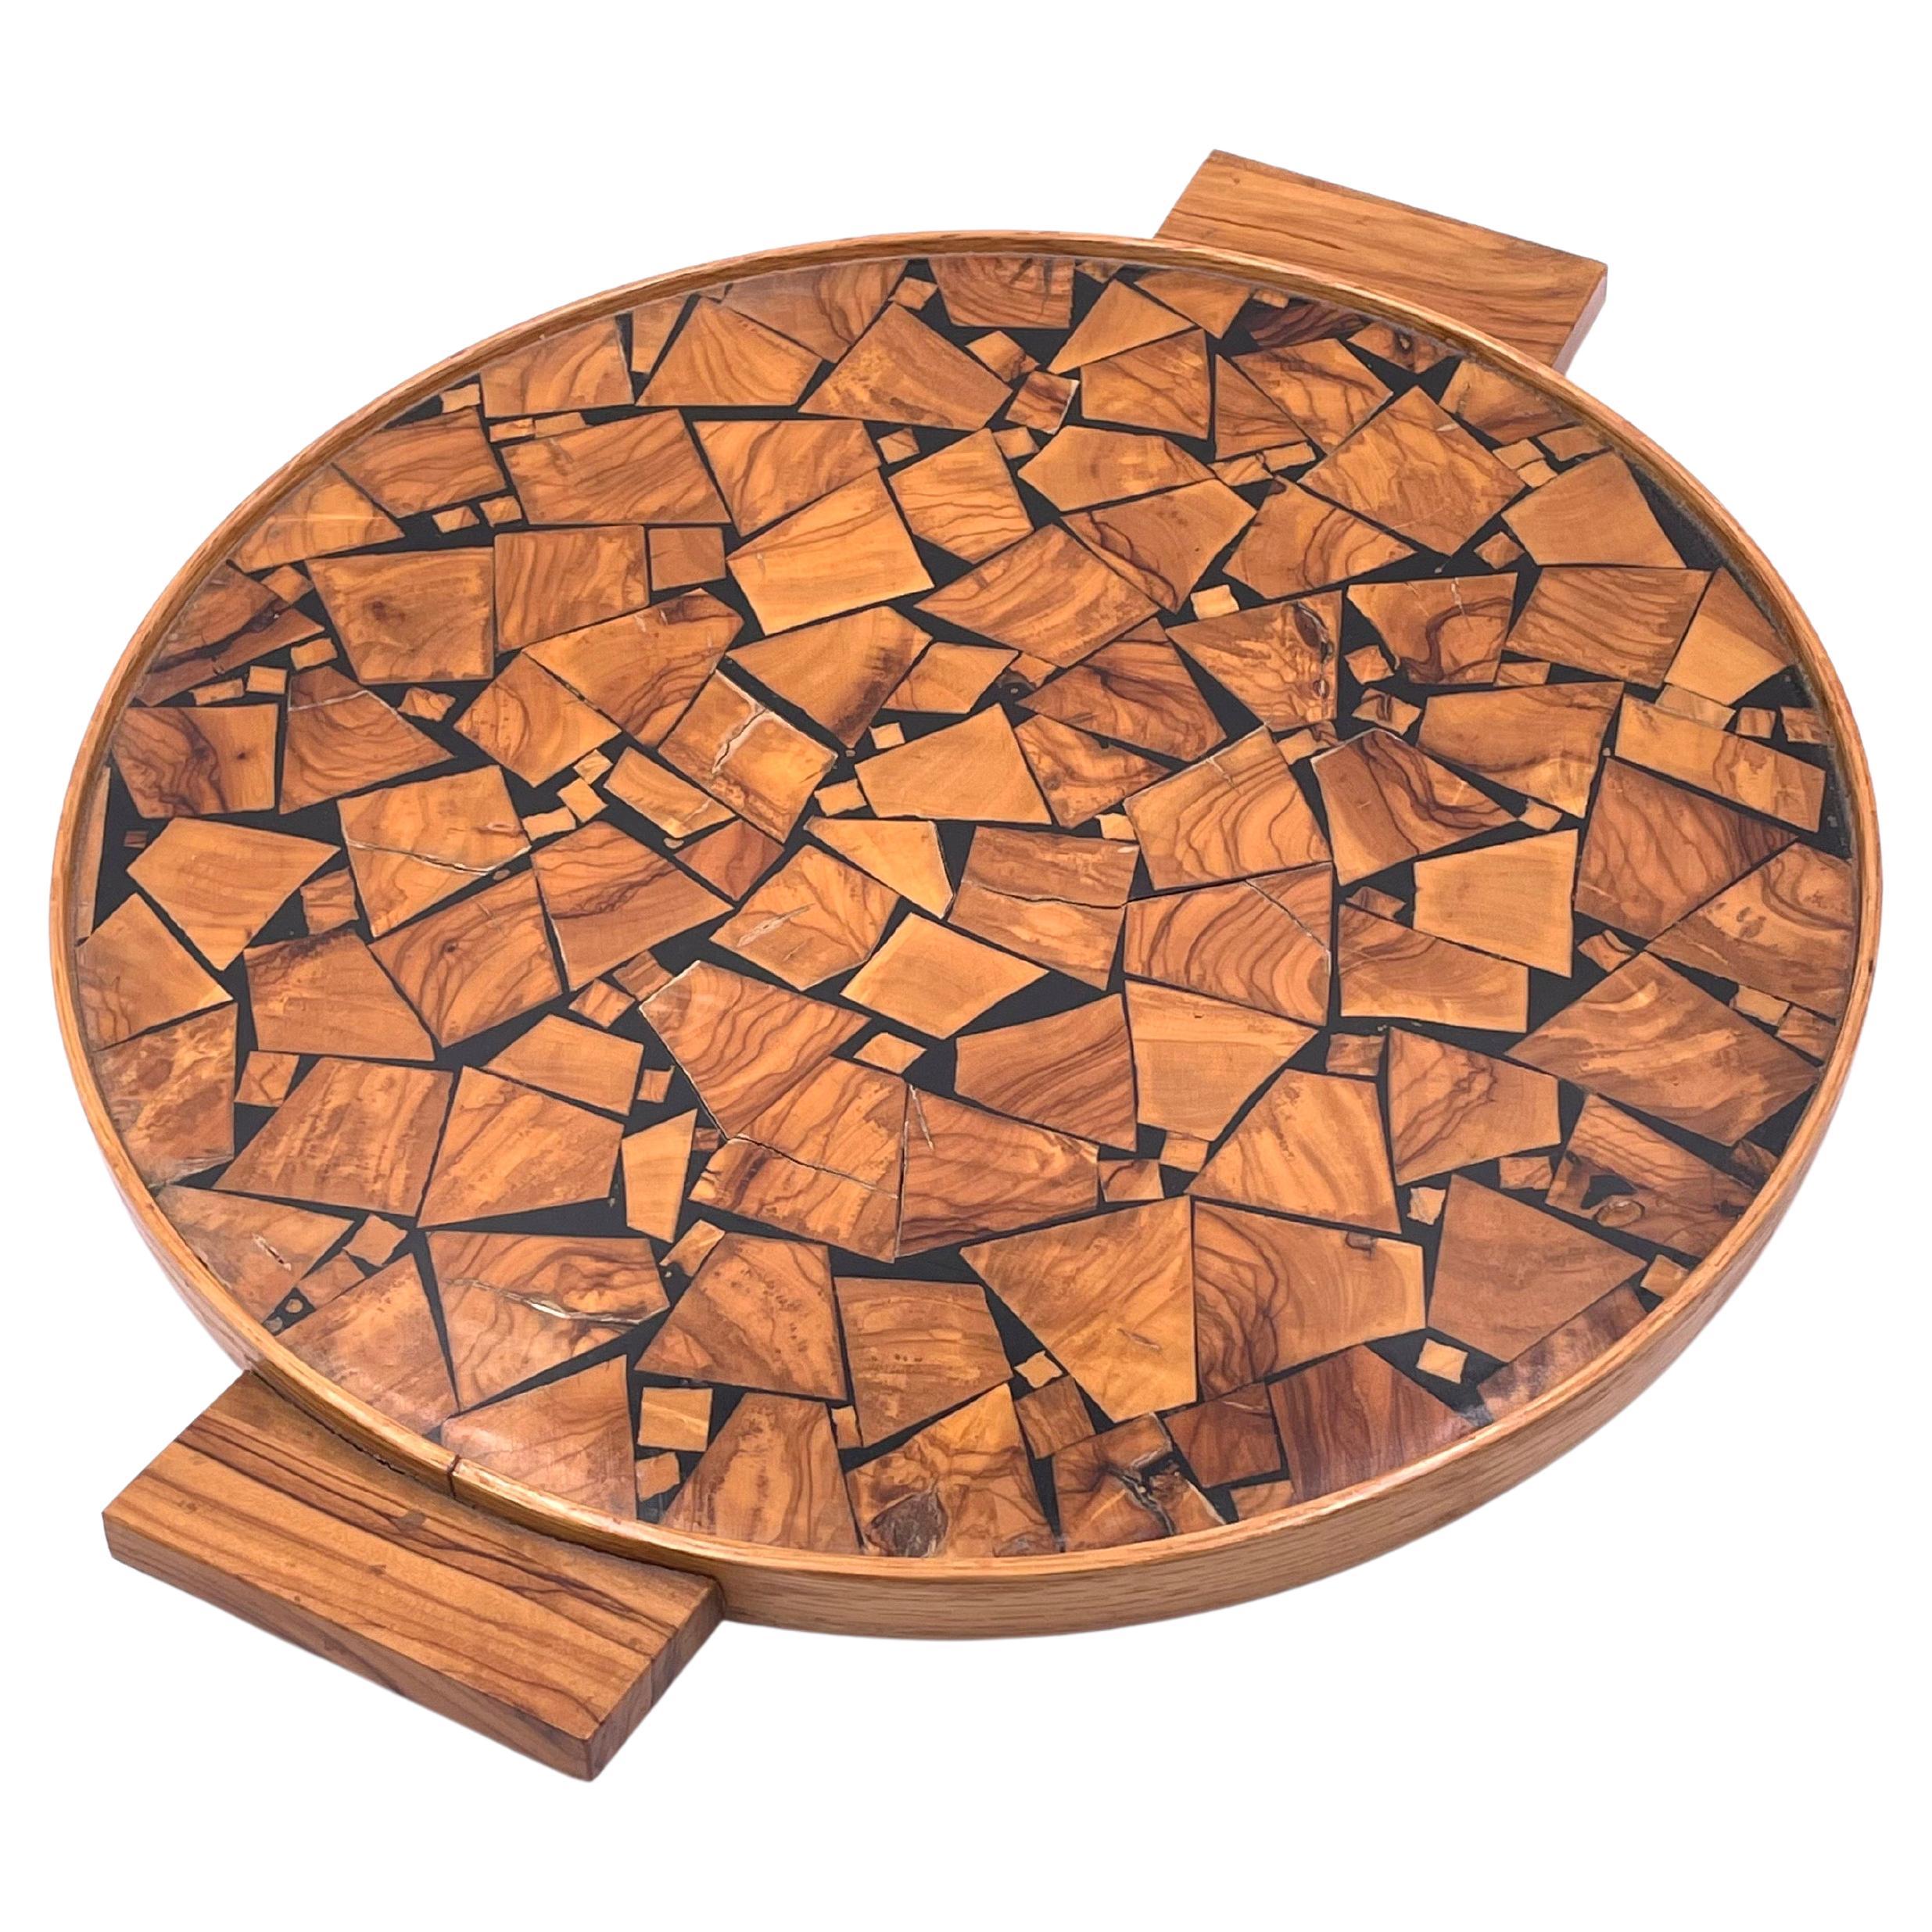 Excotic Mix Woods Art Deco Tray For Sale